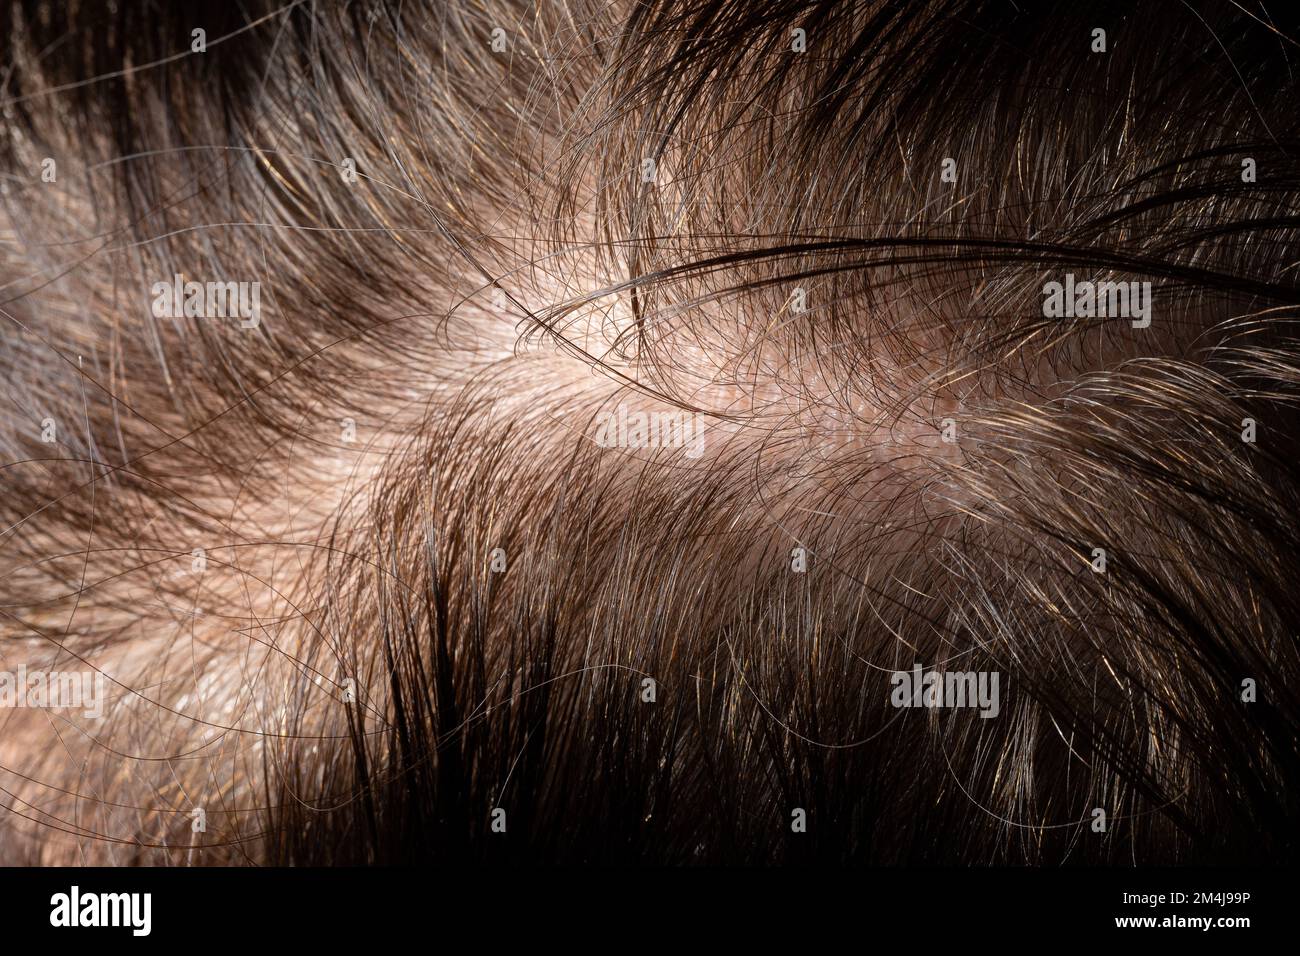 Female scalp with baldness and hair loss problems. Seborrheic dermatitis that loses hair Stock Photo